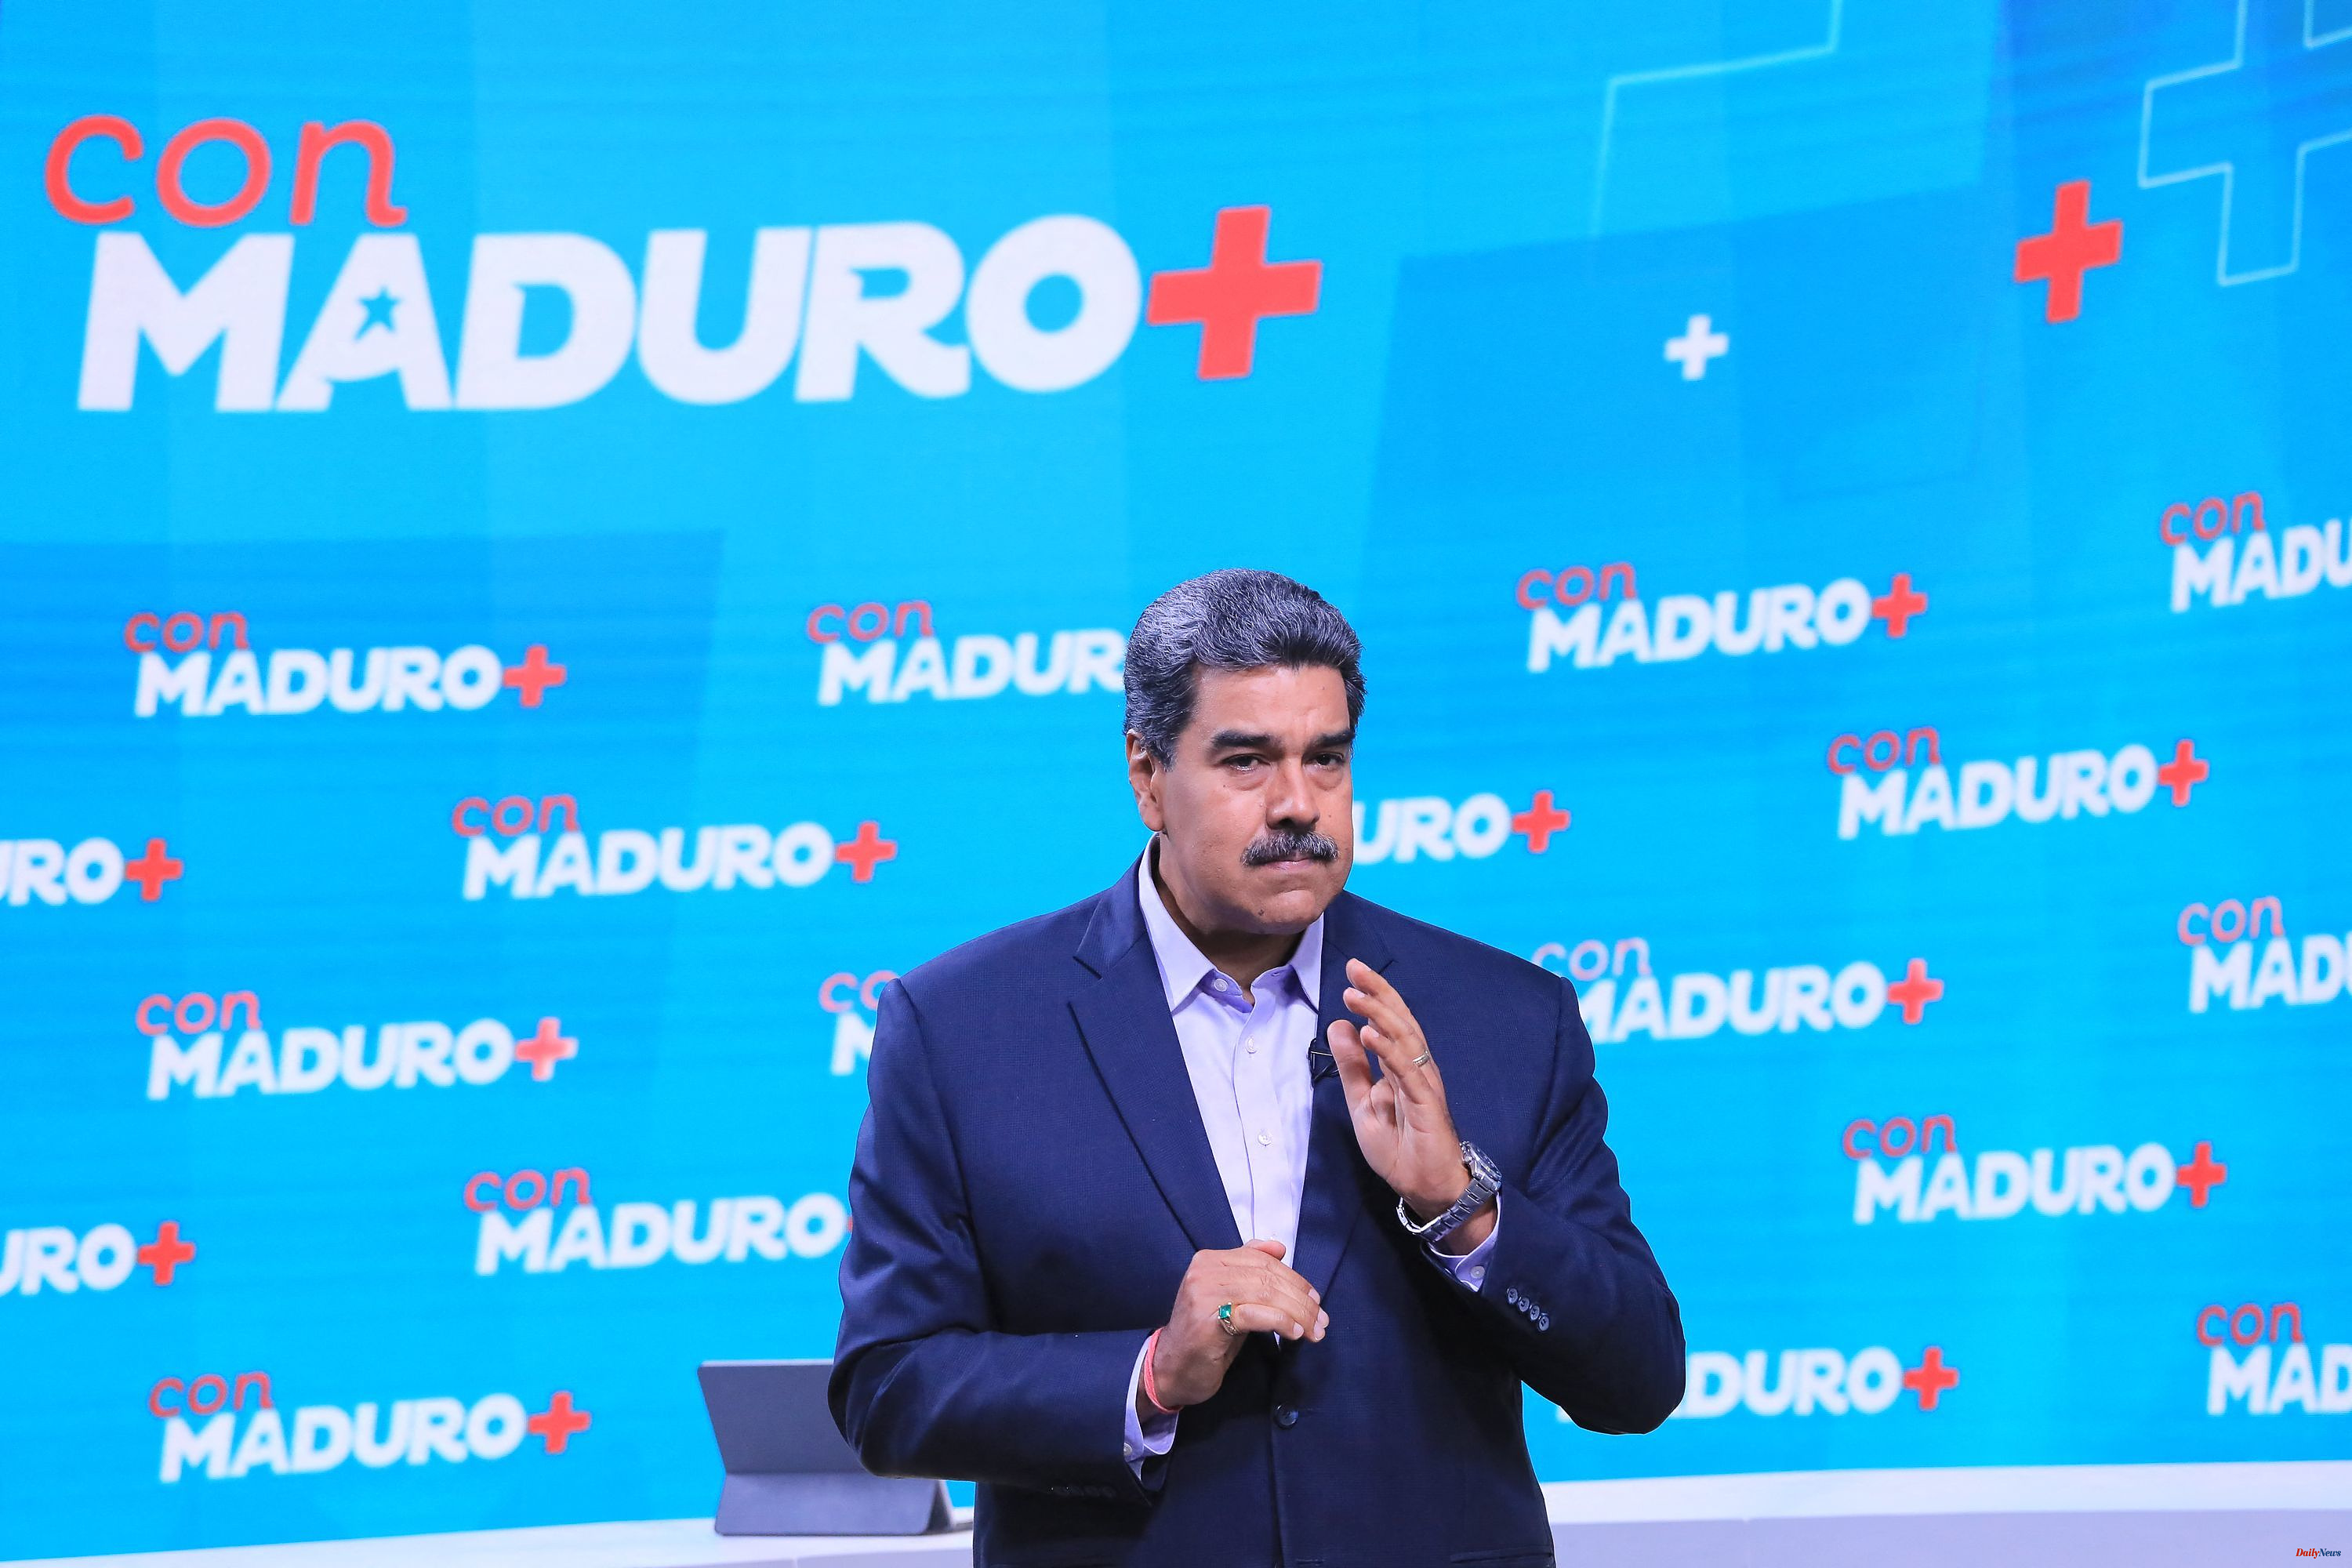 Venezuela Maduro supports the international summit of Petro: "All the support to turn the page on sanctions"